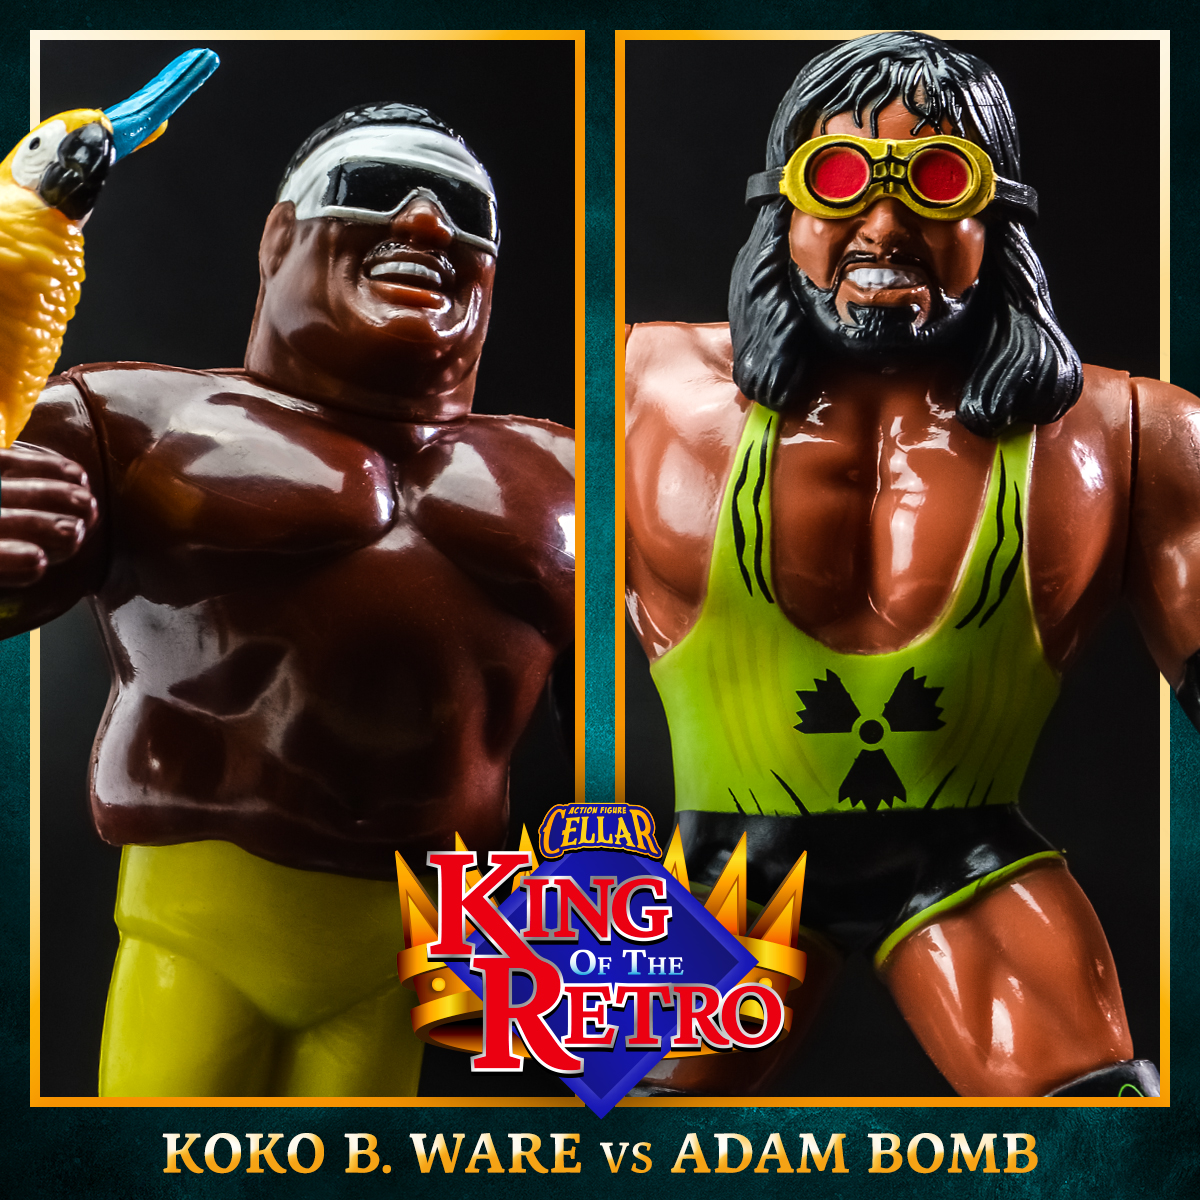 The second semi-final match of this year's #KingOfTheRetro Toynament is
#KokoBWare vs @RealBryanClark 
 
Please vote below with who you would like to progress to the final. Votes will be counted across all my social media accounts.

#hwo #wwfhasbro #chellatoys #adambomb